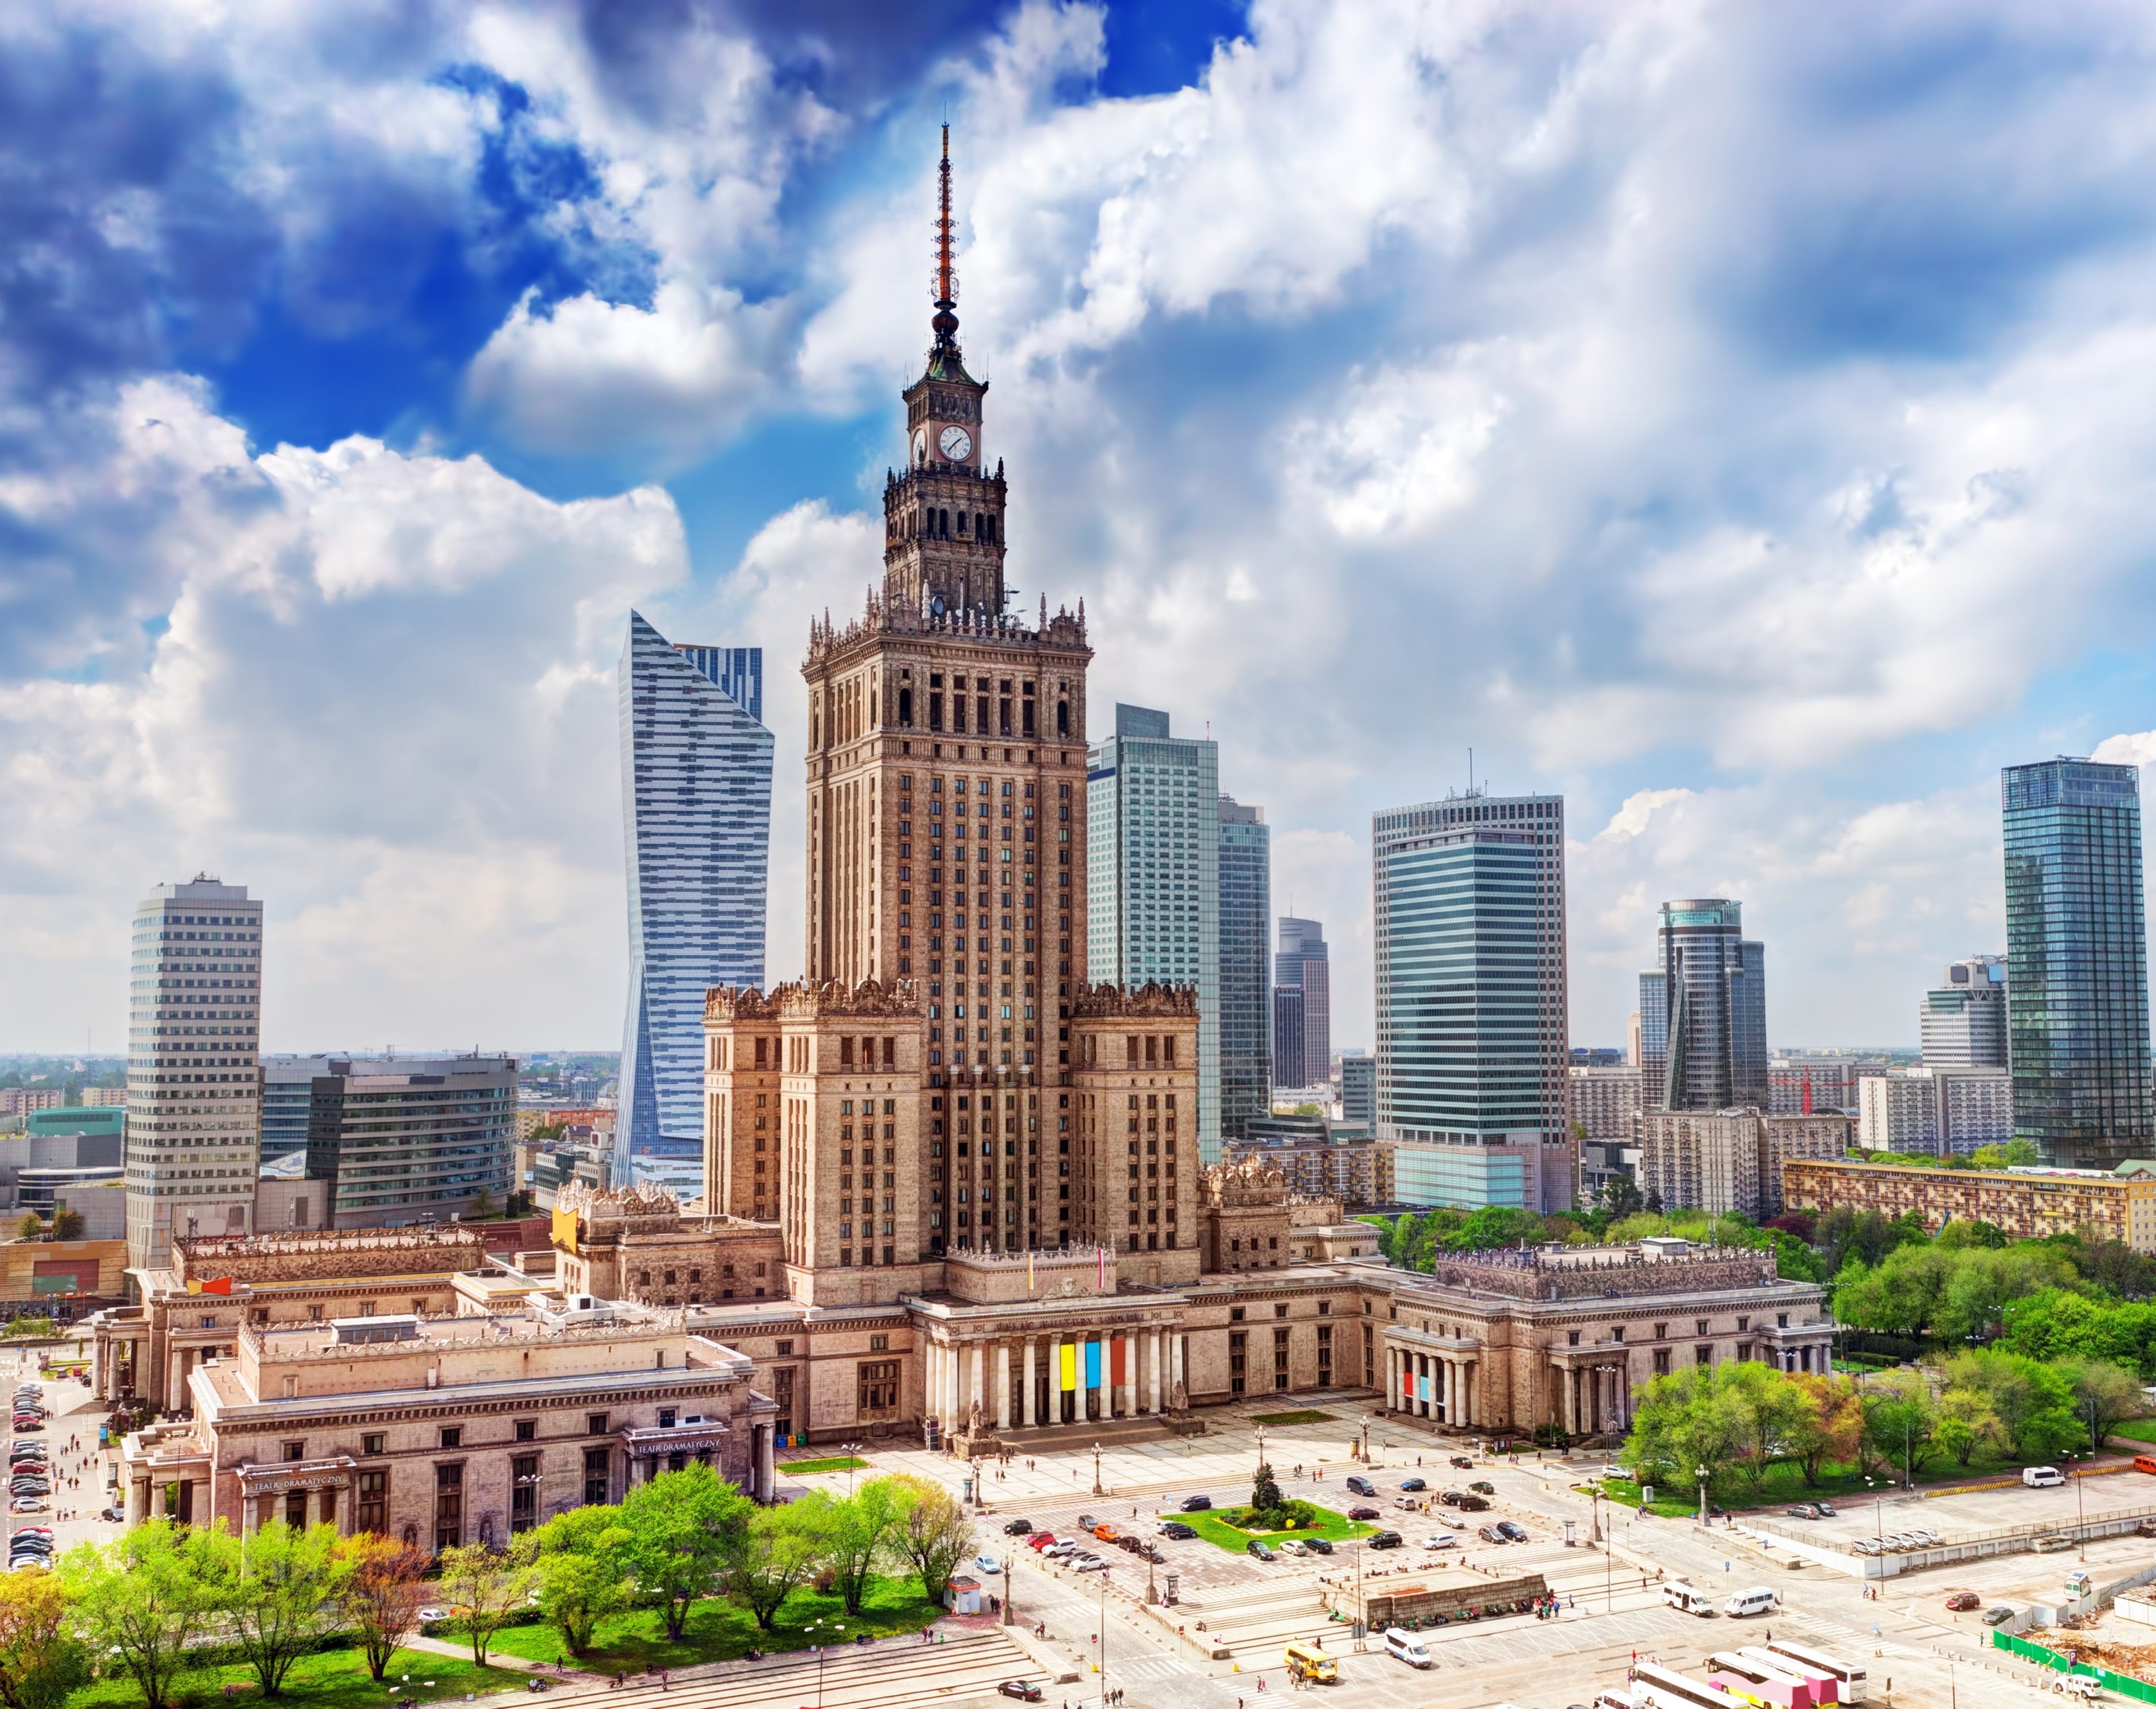 Palace of Culture and Science, Warsaw, Poland, Palace of Culture and Science